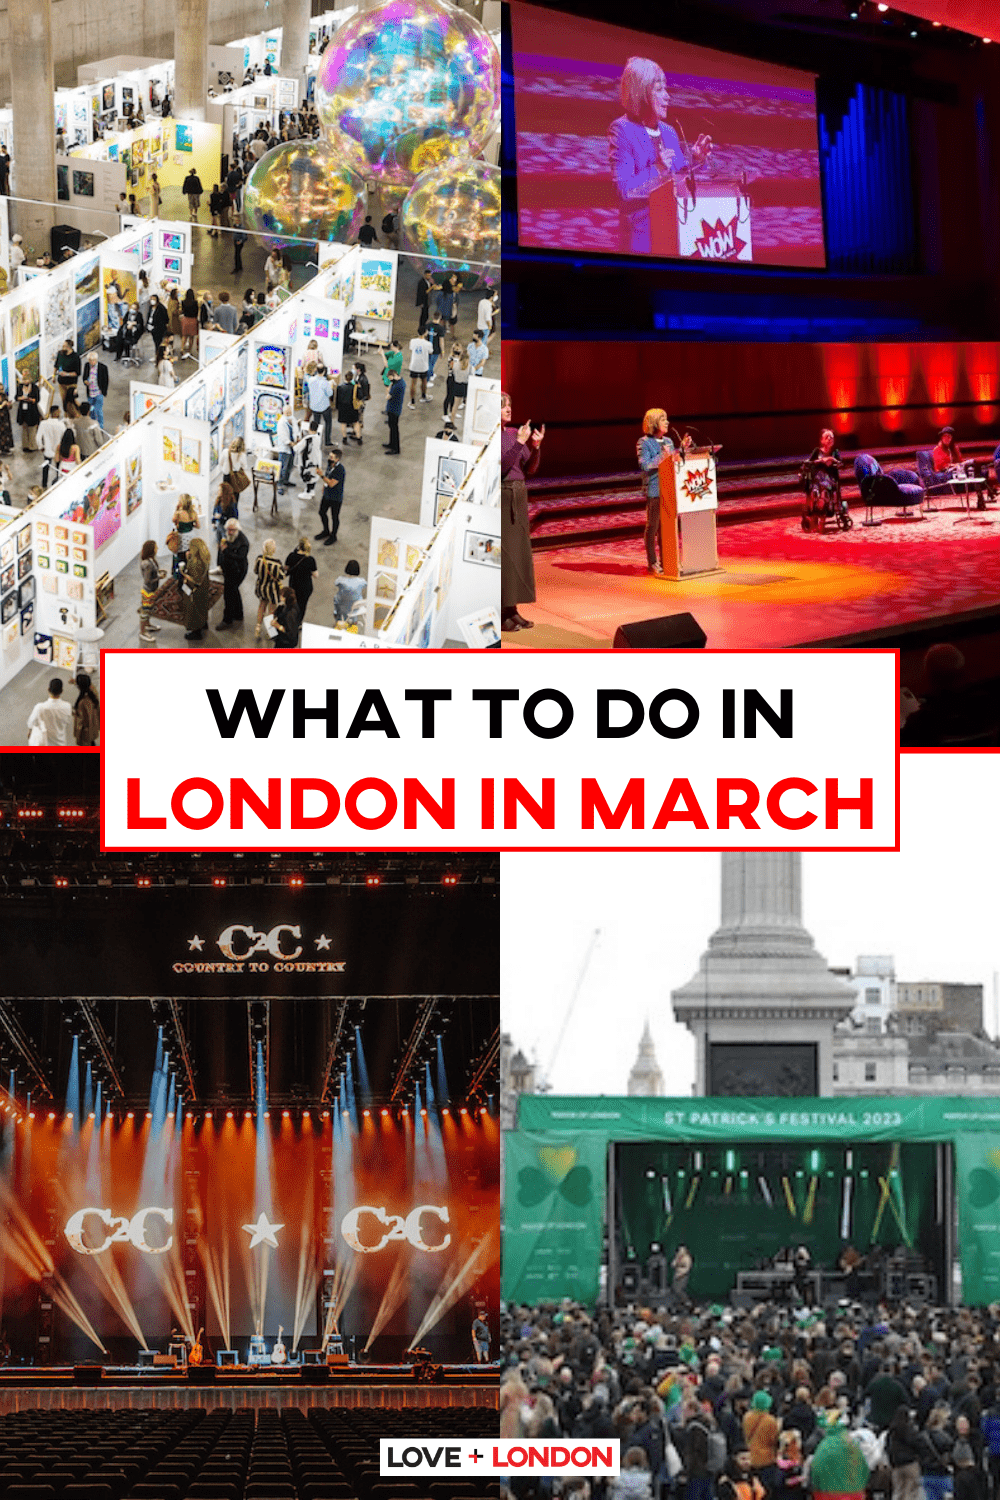 This is a pinterest pin of four images of events in London in March.